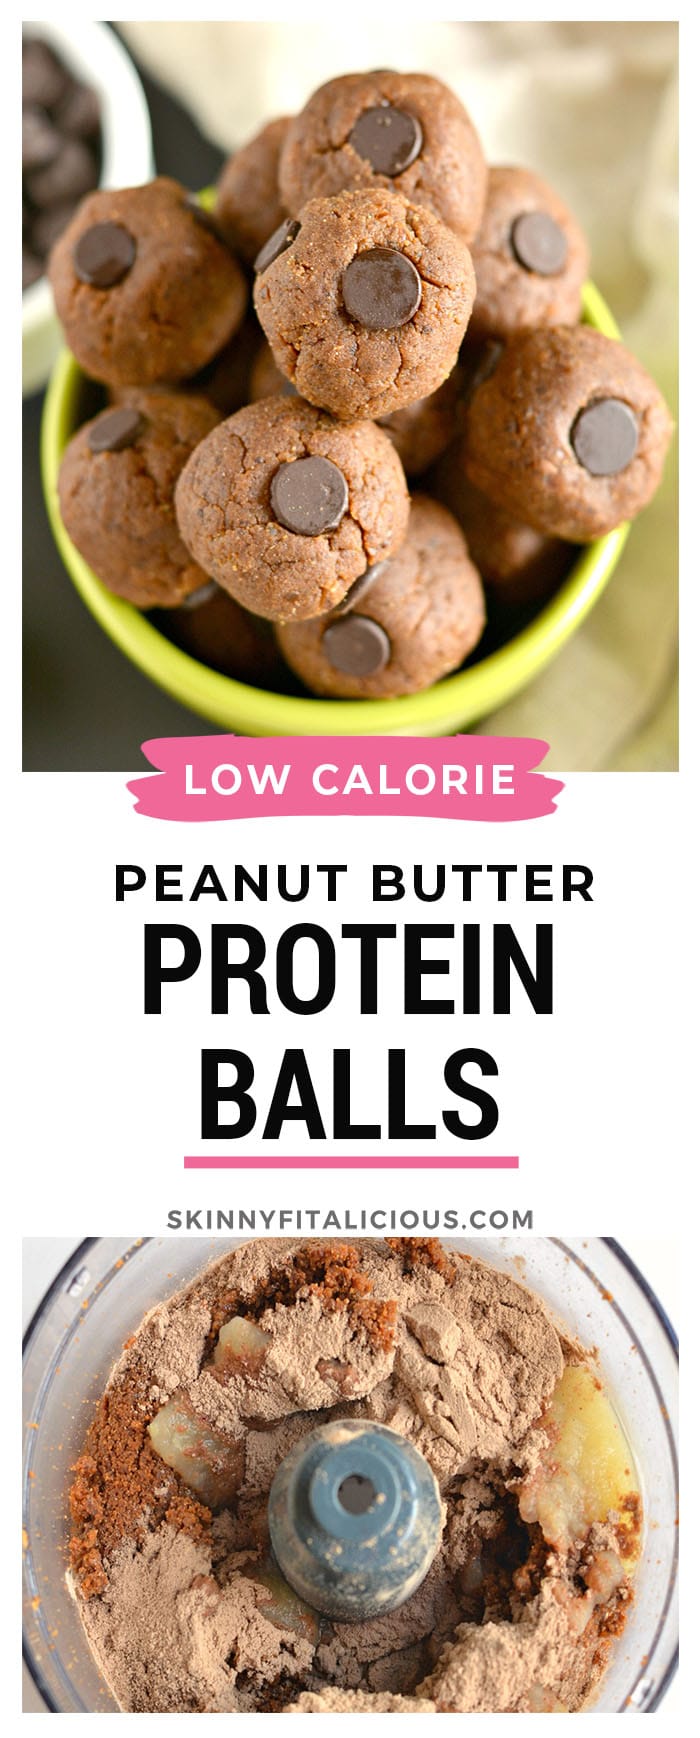 No Bake HEALTHY Chocolate Peanut Butter Protein Balls with 5 ingredients that's simple and easily customizable. A candy bar tasting goodie you can't resist! Vegan + Gluten Free + Low Calorie